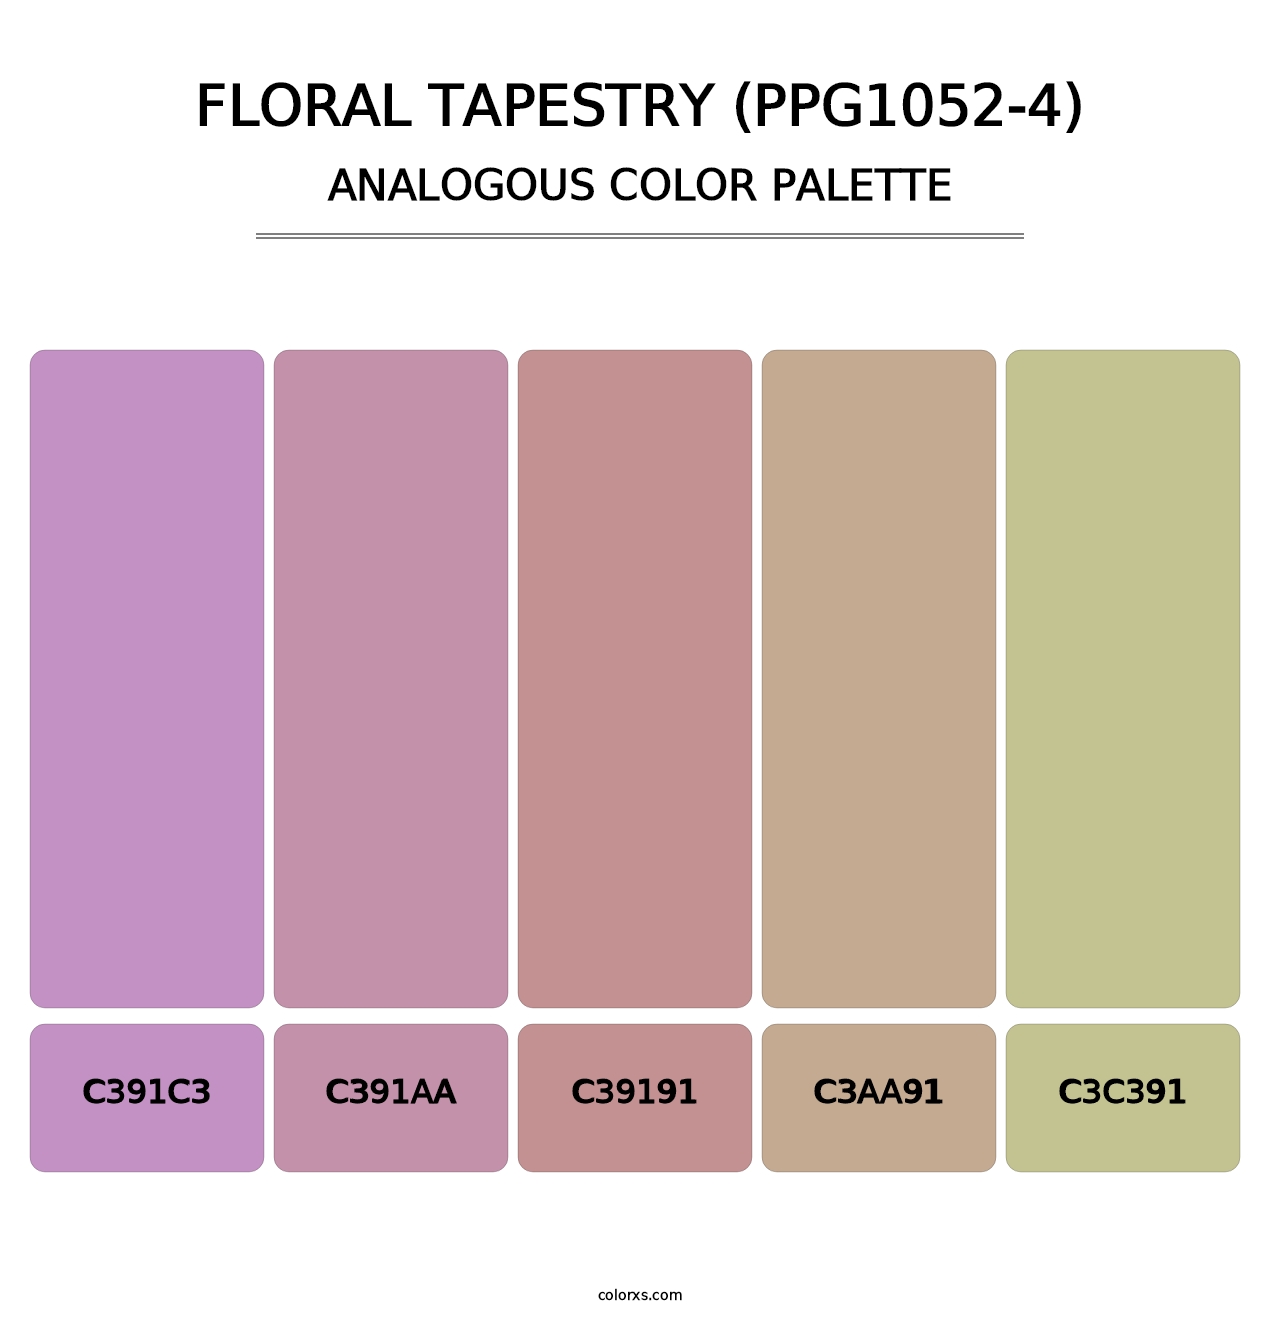 Floral Tapestry (PPG1052-4) - Analogous Color Palette